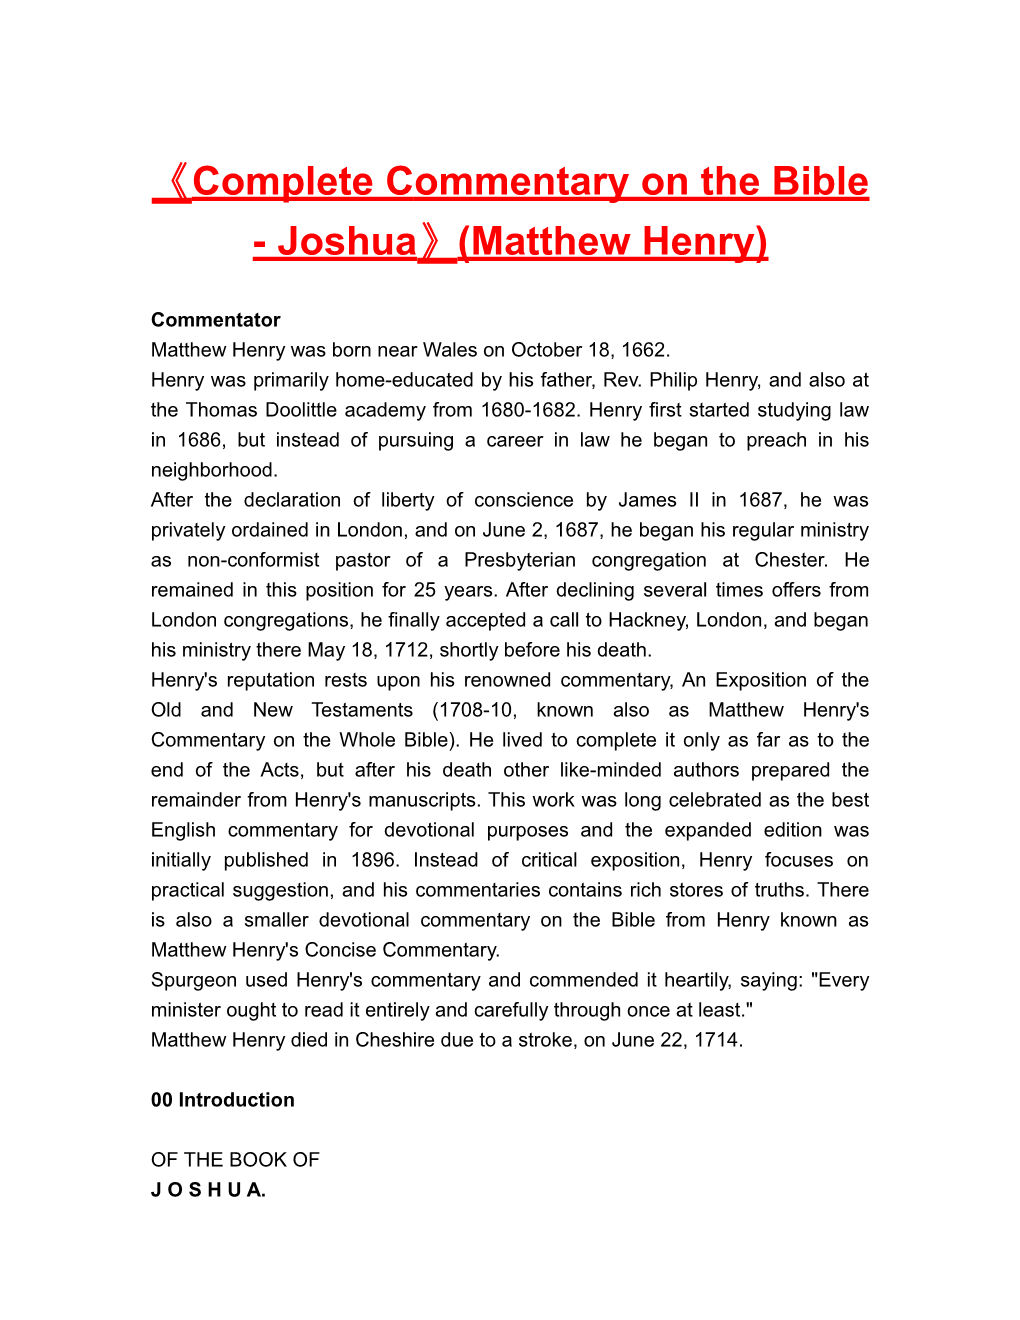 Completecommentary on the Bible-Joshua (Matthew Henry)